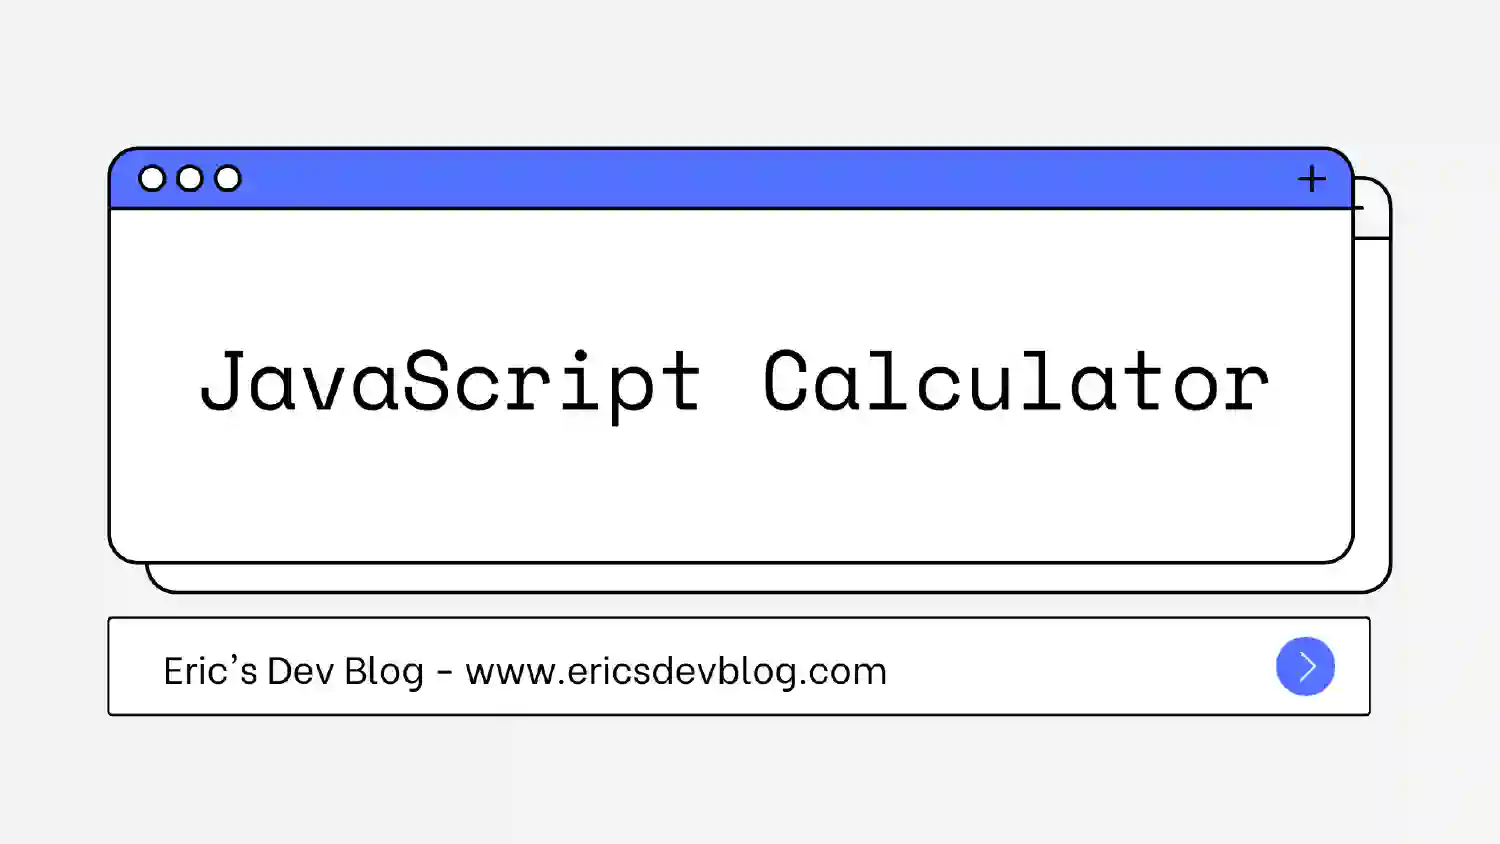 Building a Calculator with HTML, CSS, and JavaScript